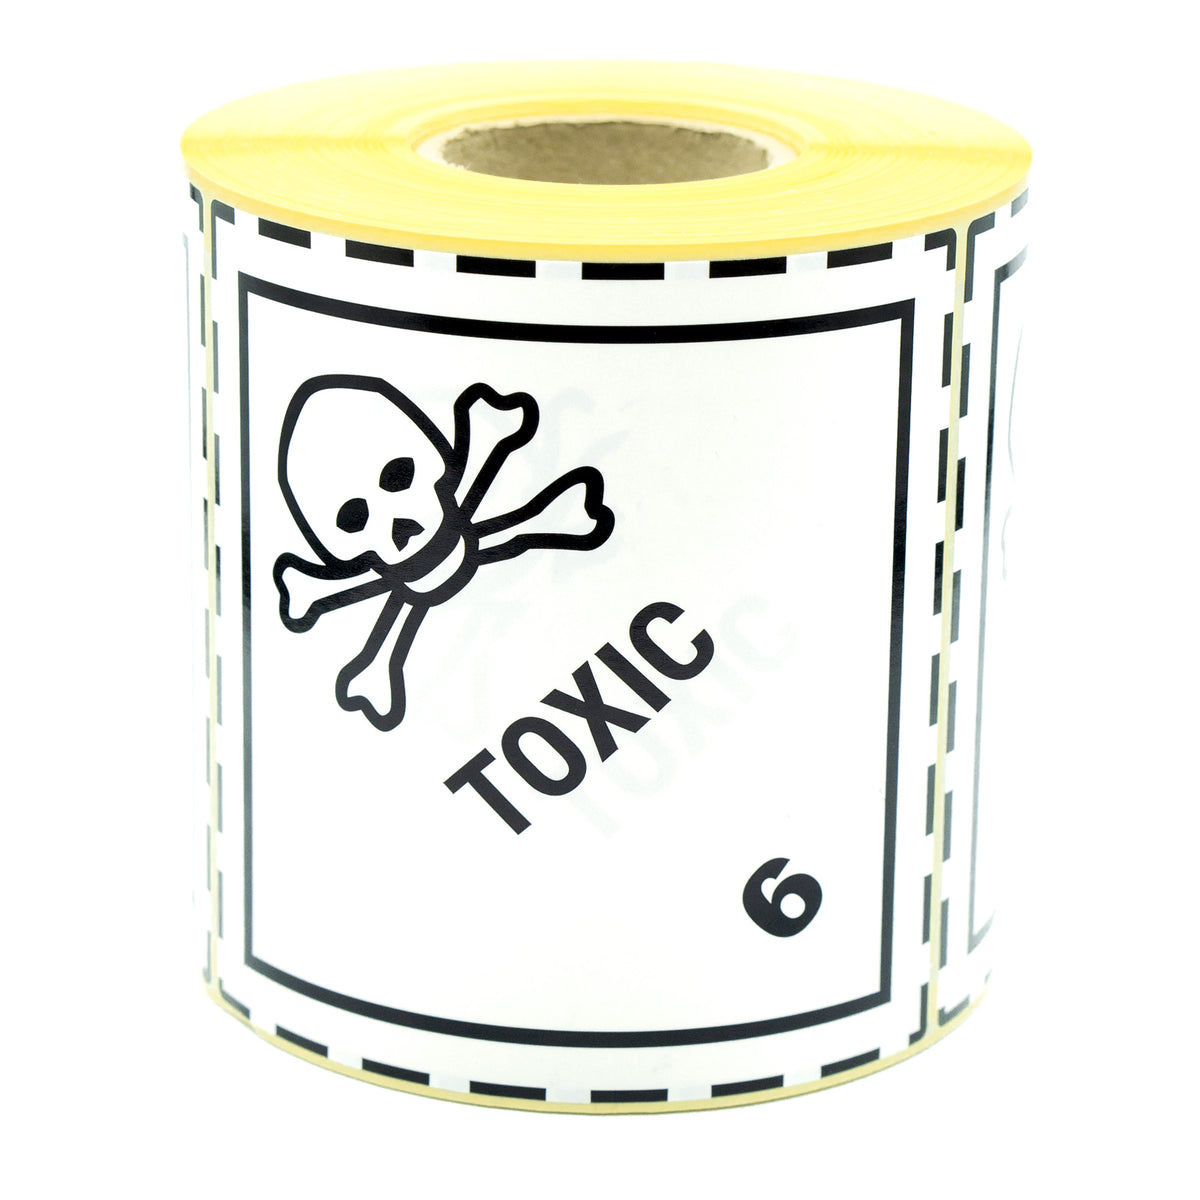 Warning Labels Class 6 Toxic Substances 100x100 500 per roll